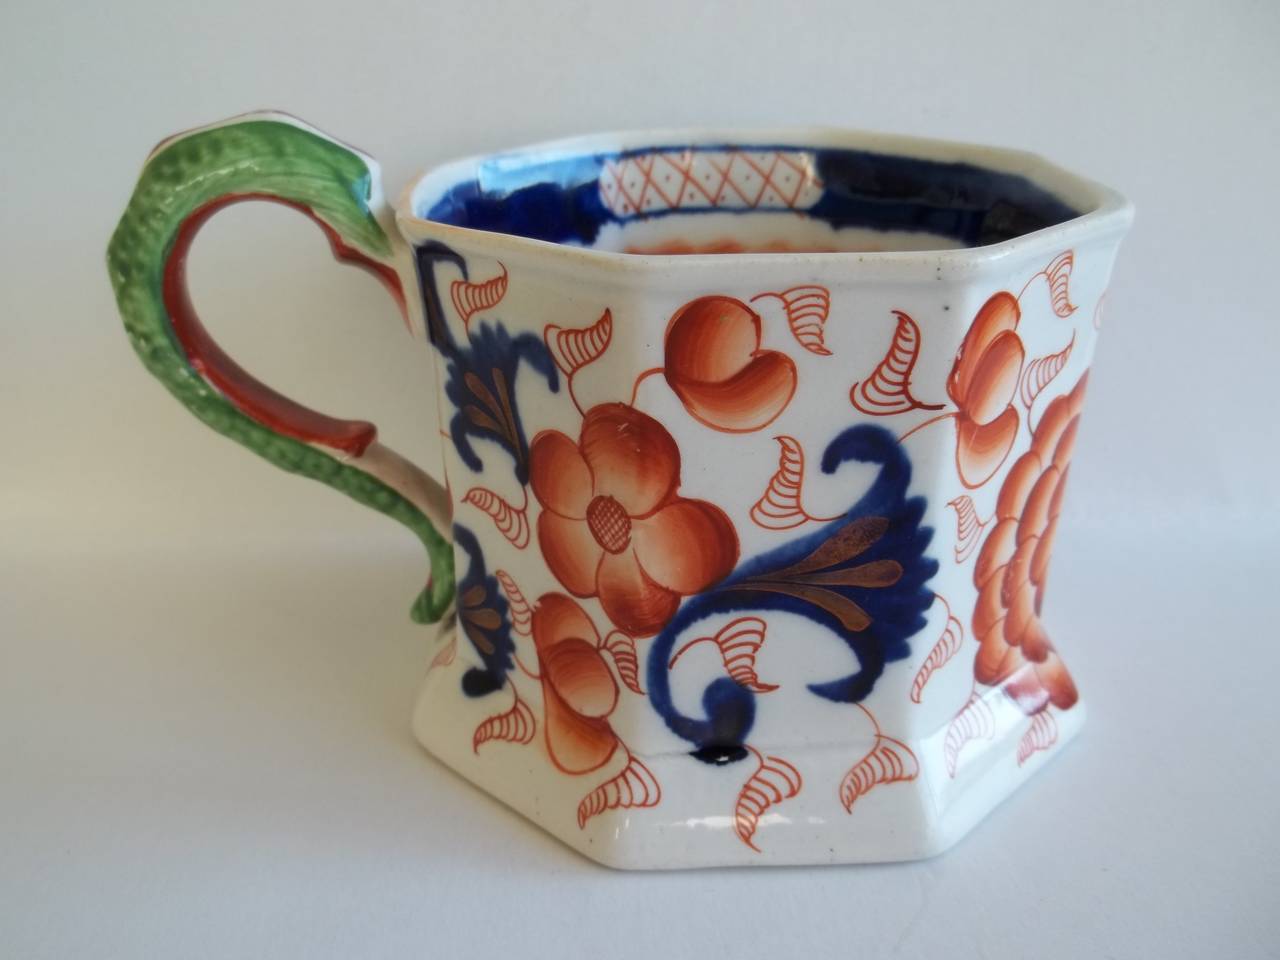 Early ironstone cider mugs are rare.

This one has an octagonal shape with a lovely high loop handle.

The mug has a good chinoiserie Imari pattern, hand-painted in bold enamels with additional gilded detail. There is also an inner rim